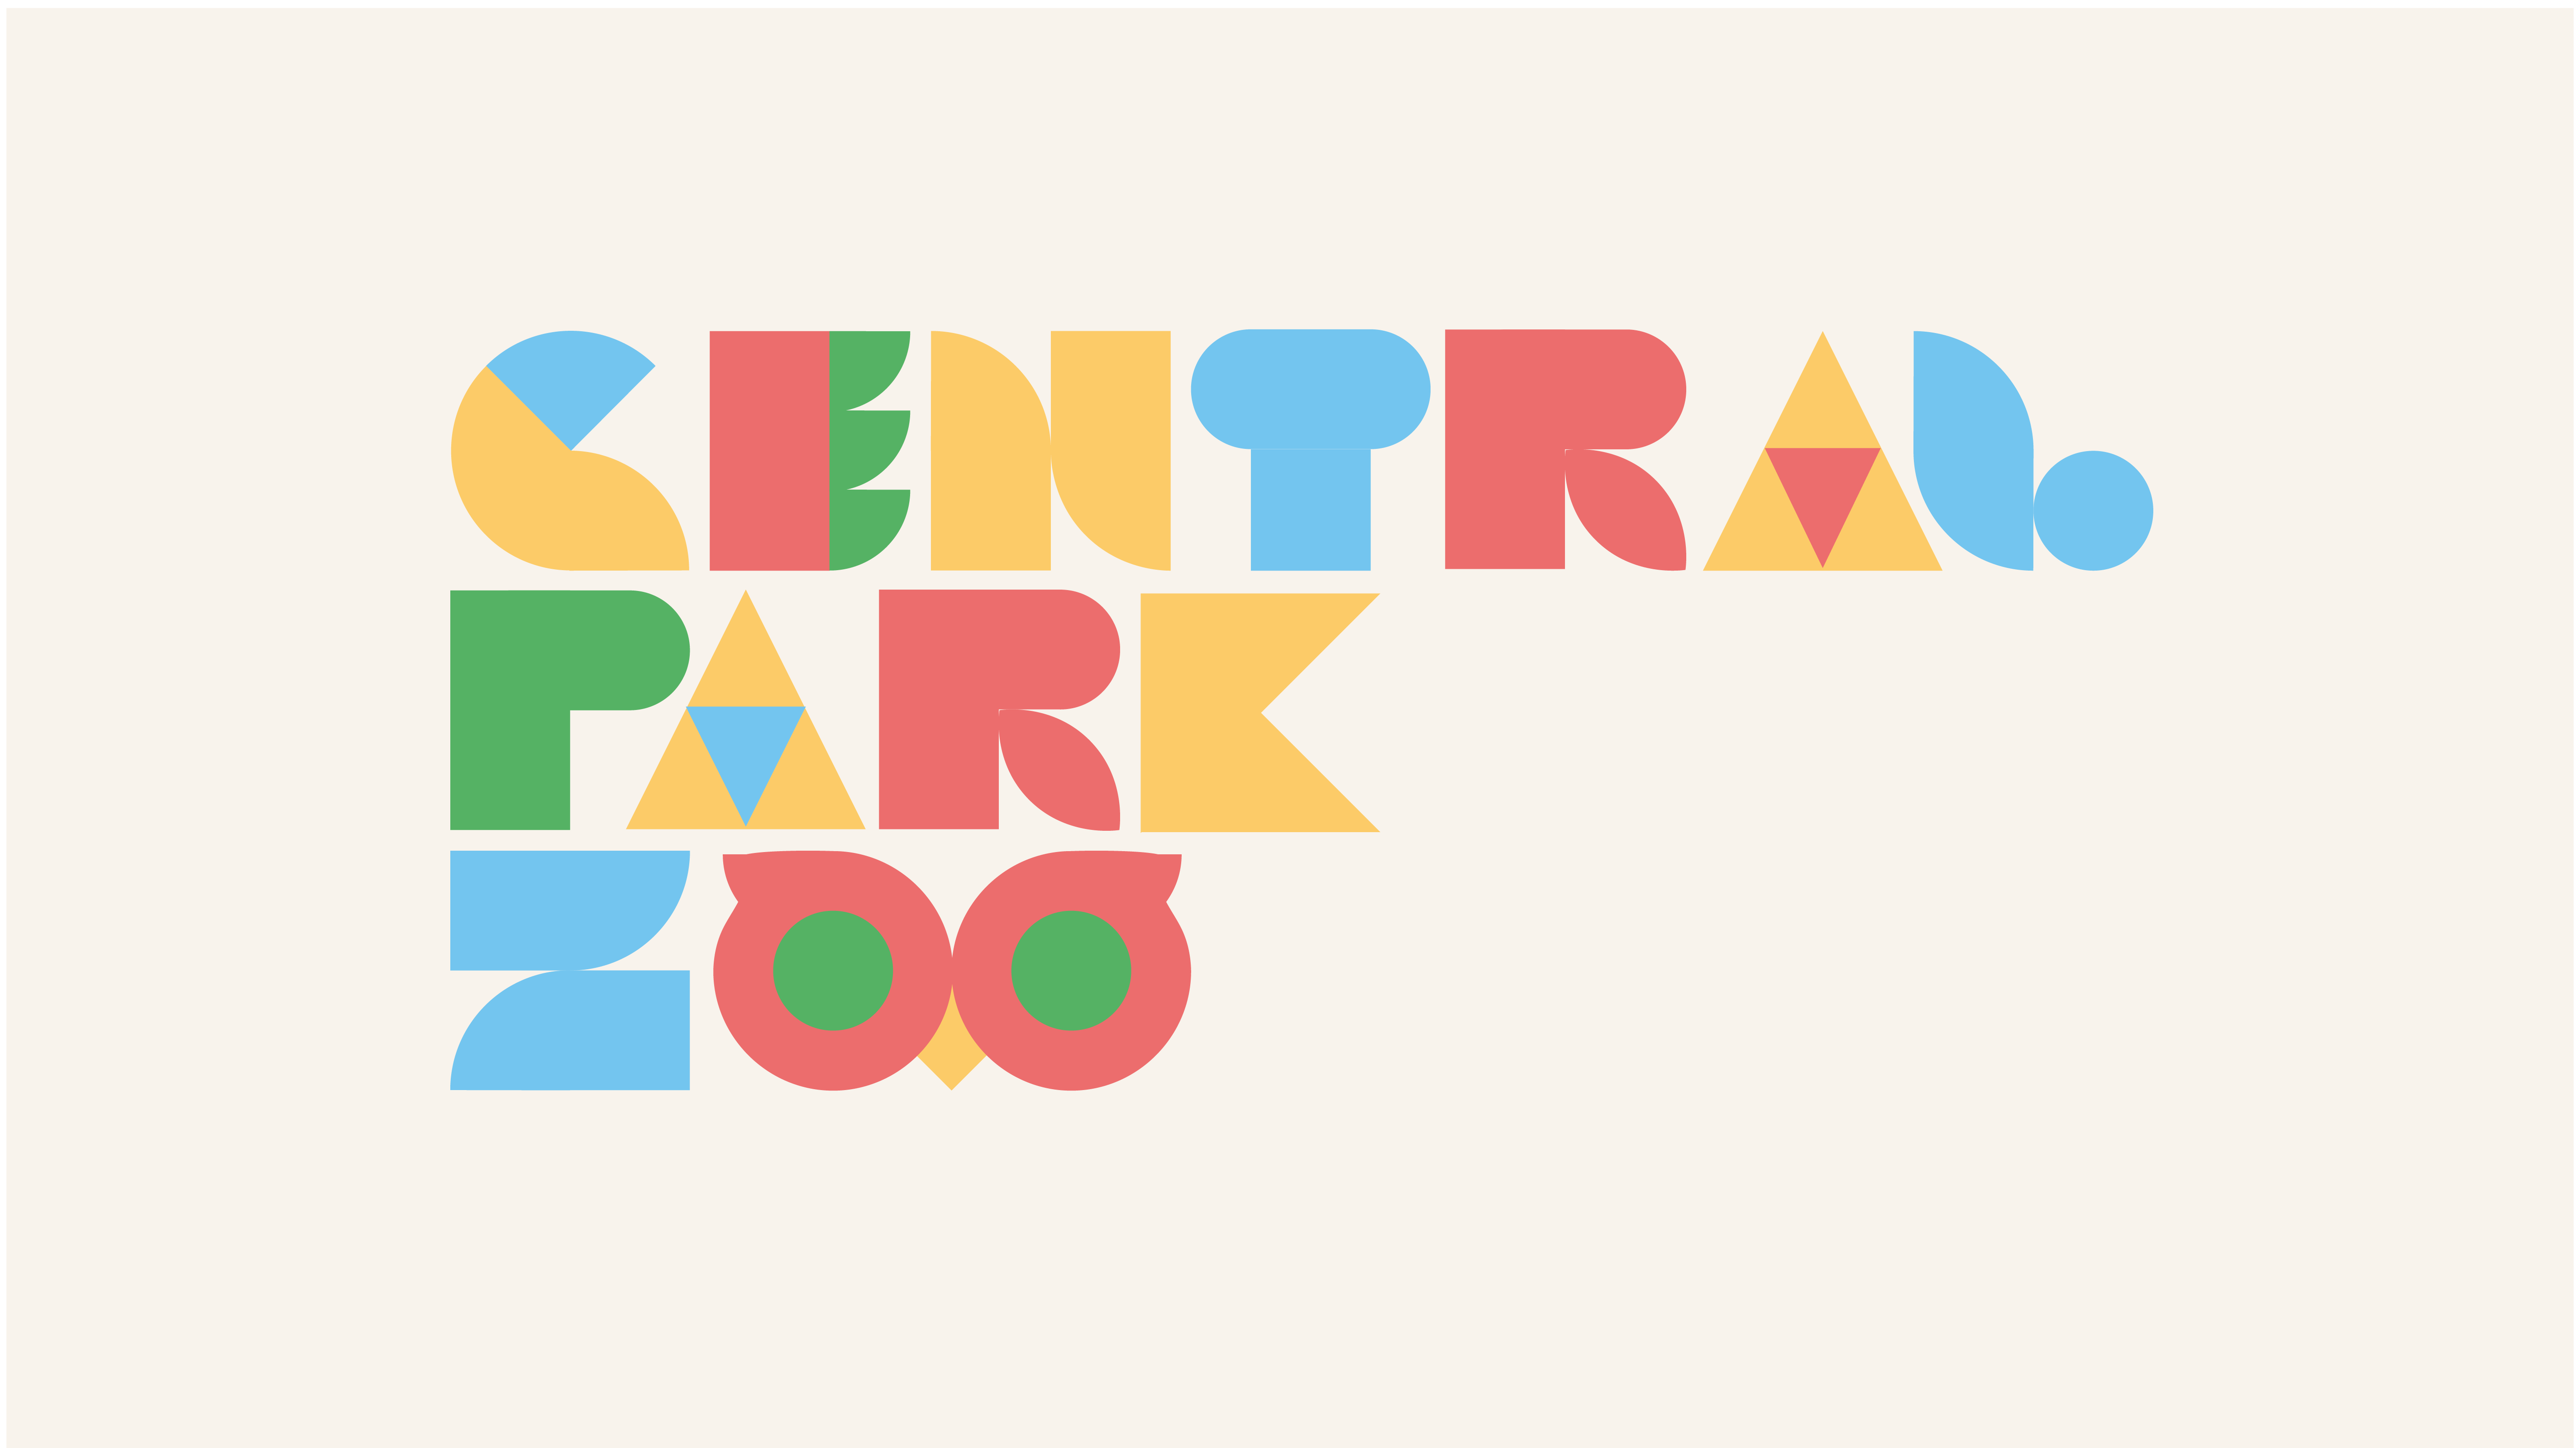 Rebranding Central Park Zoo by Wanting Wei SVA Design